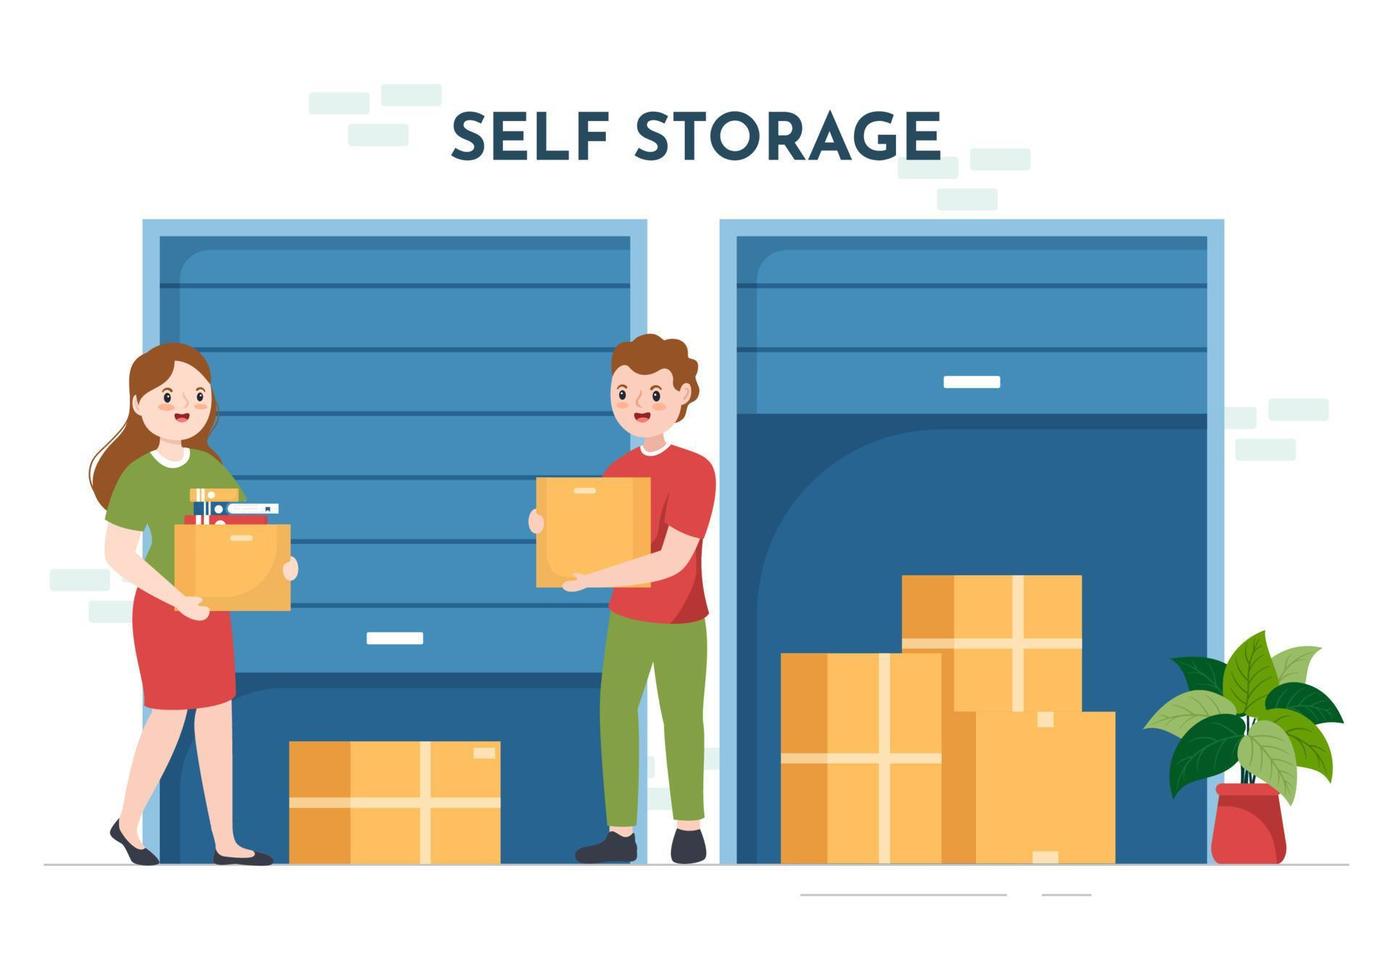 Self Storage of Cardboard Boxes Filled with Unused Items in Mini Warehouse or Rental Garage in Flat Cartoon Hand Drawn Templates Illustration vector